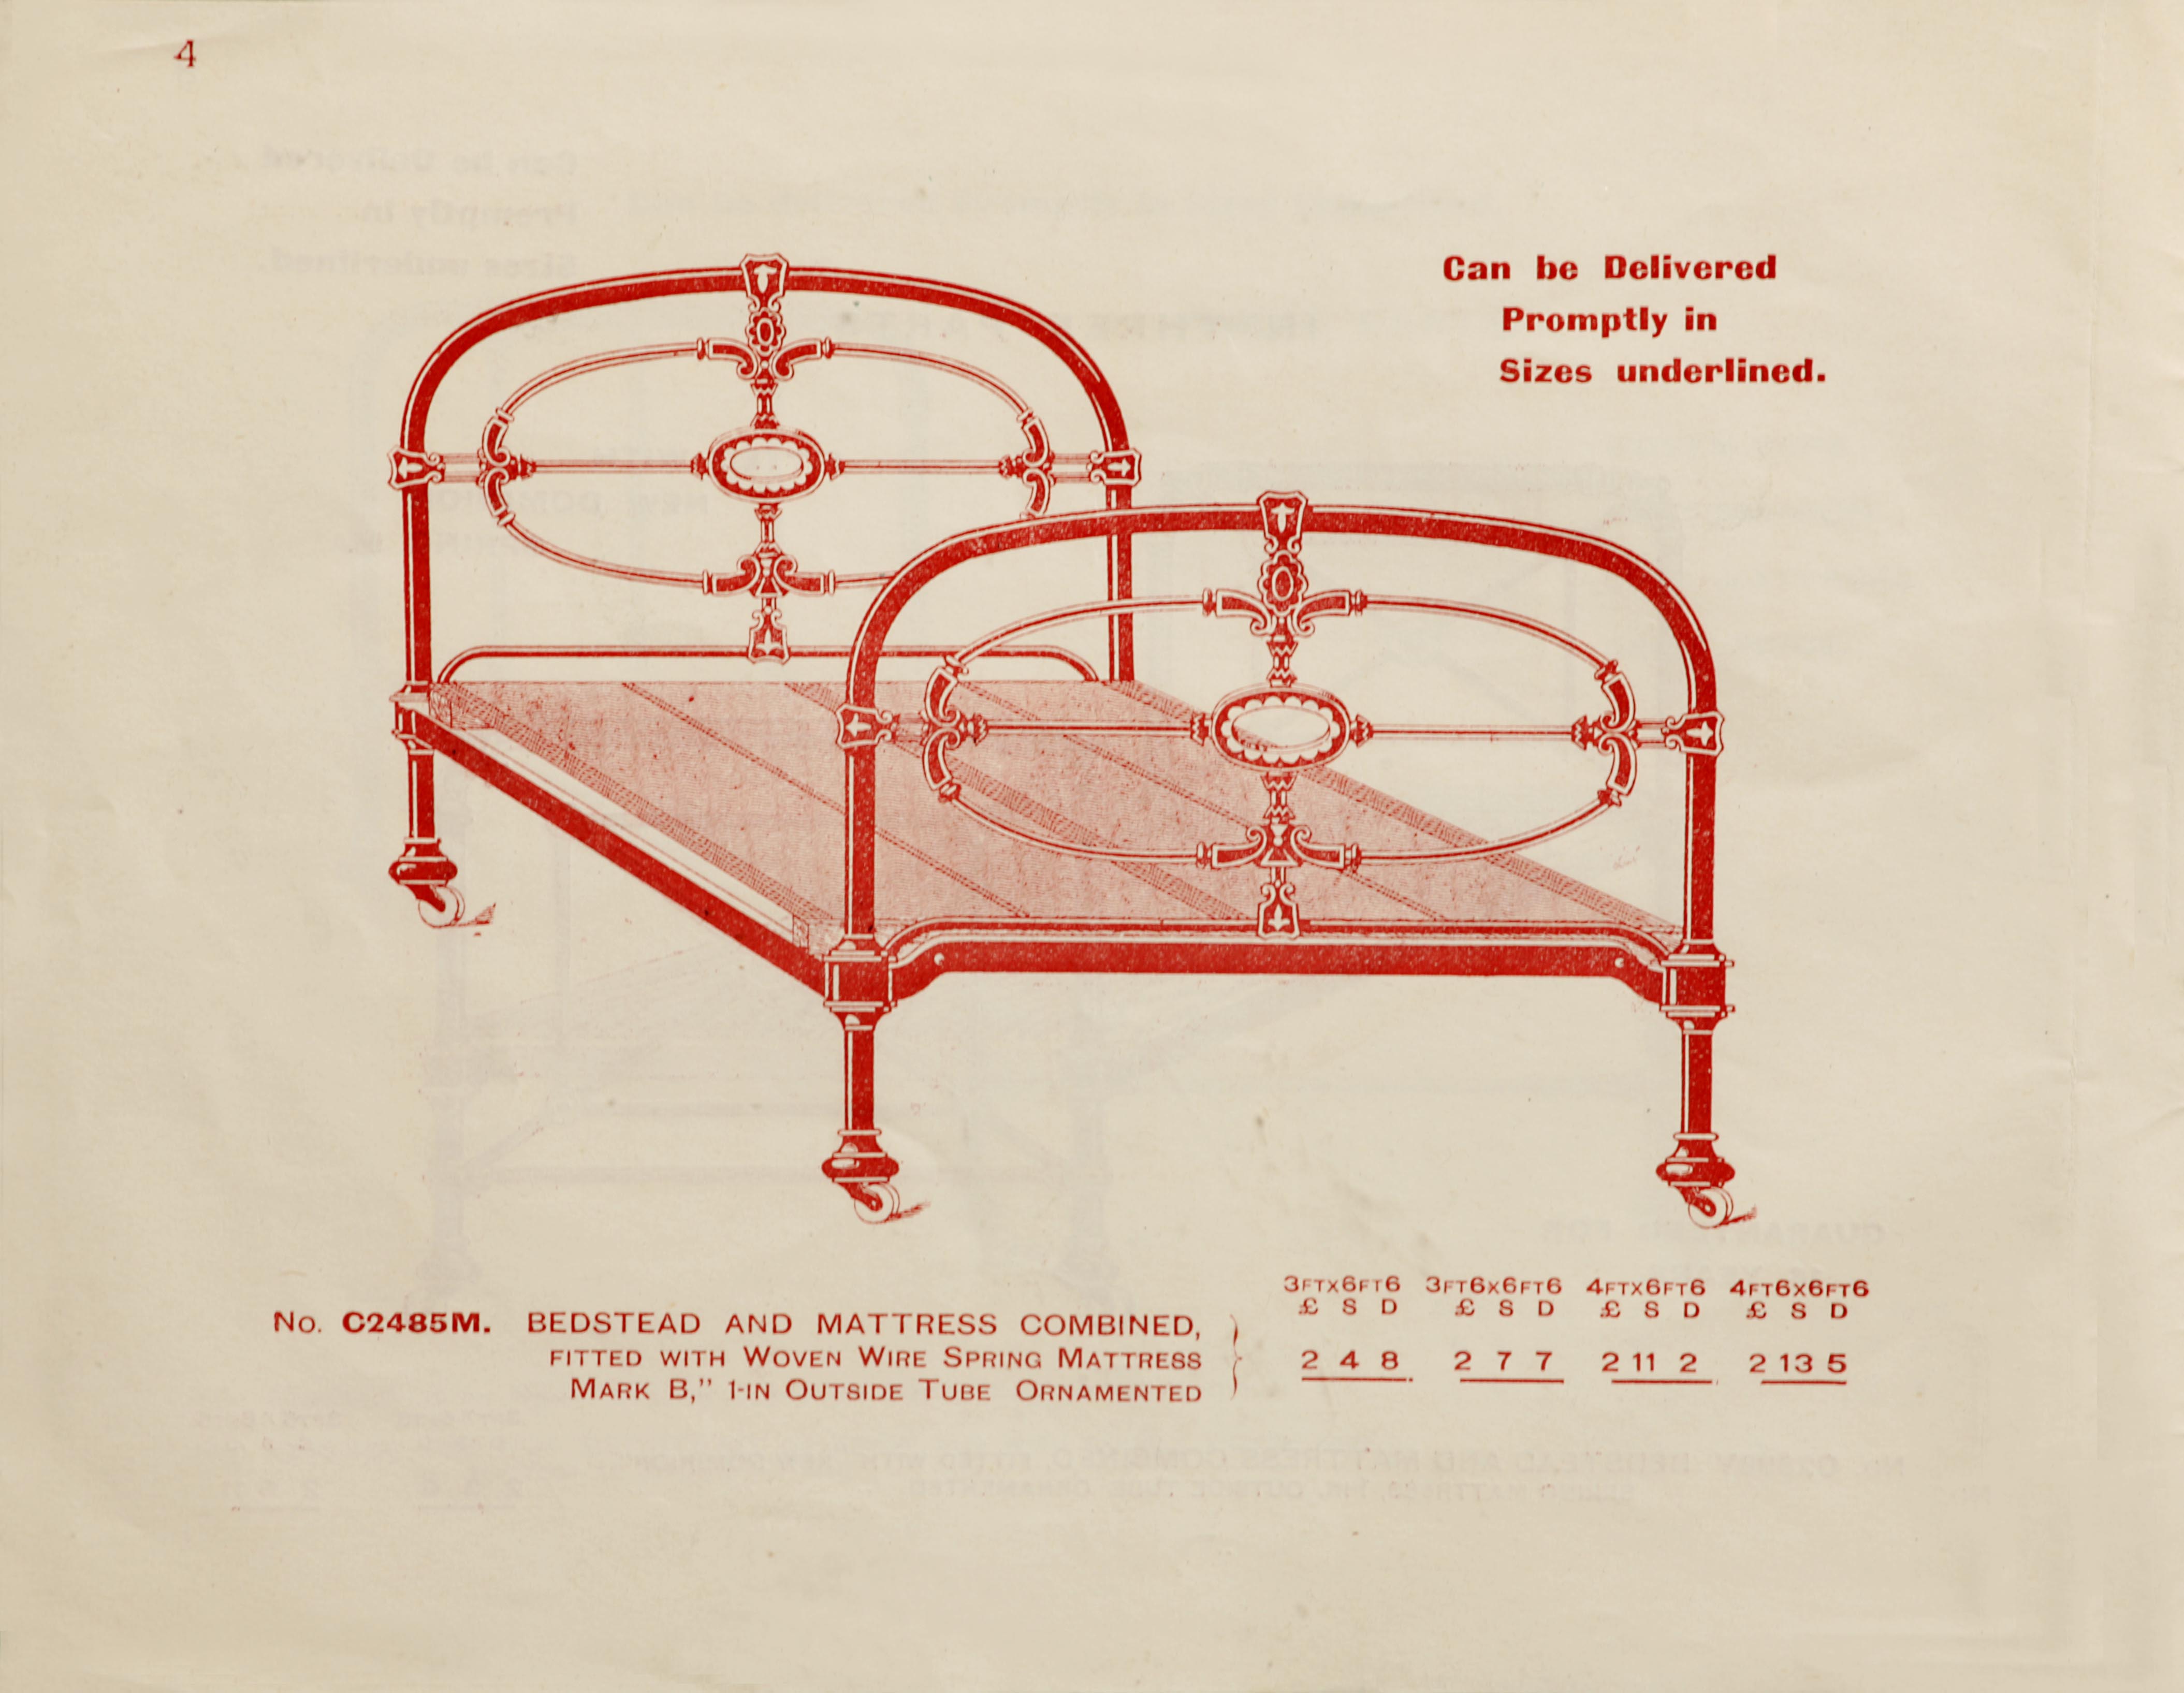 P. Endres Bed Catalog Page 6